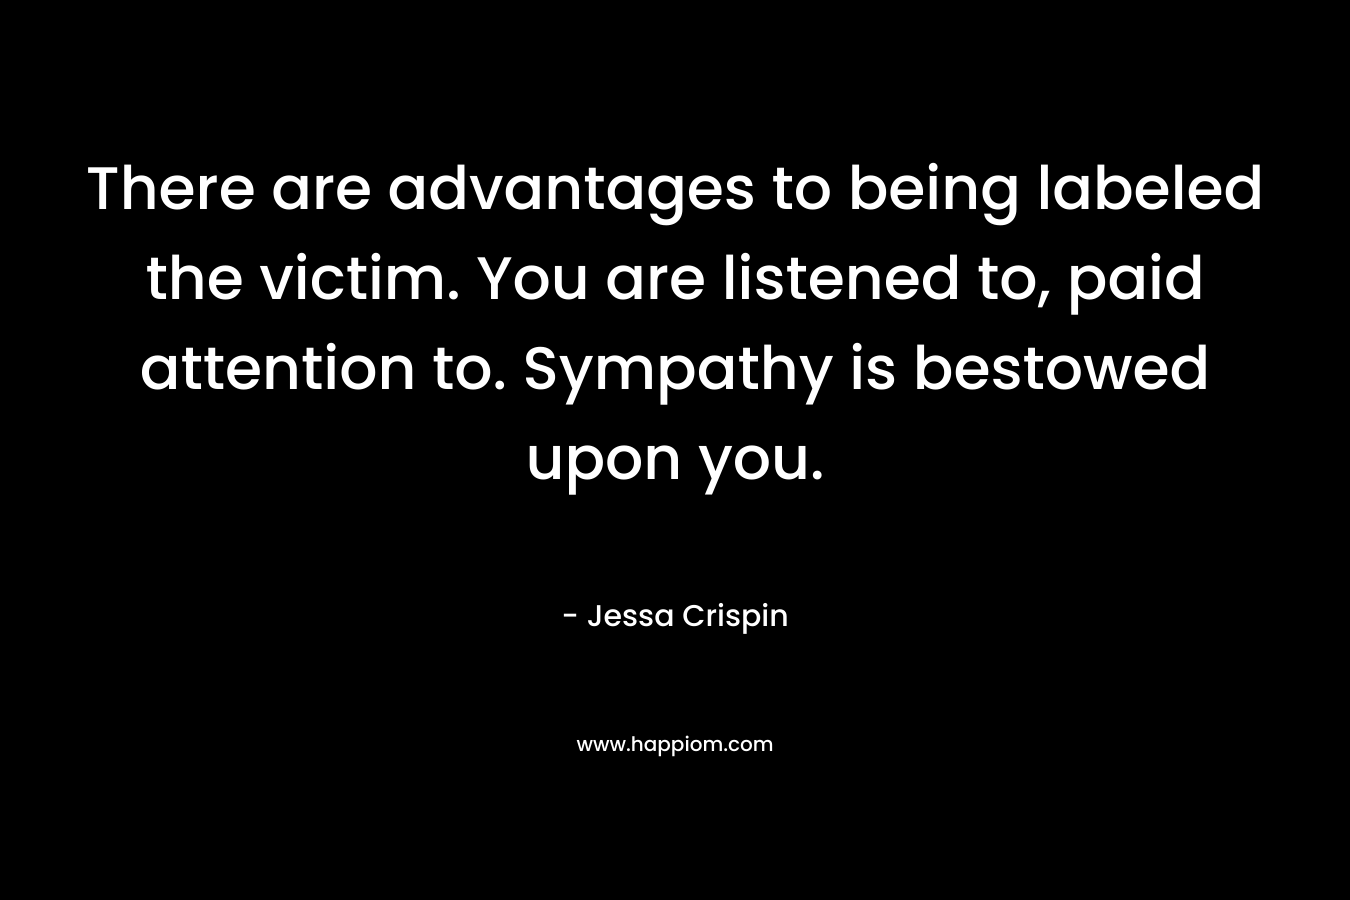 There are advantages to being labeled the victim. You are listened to, paid attention to. Sympathy is bestowed upon you. – Jessa Crispin